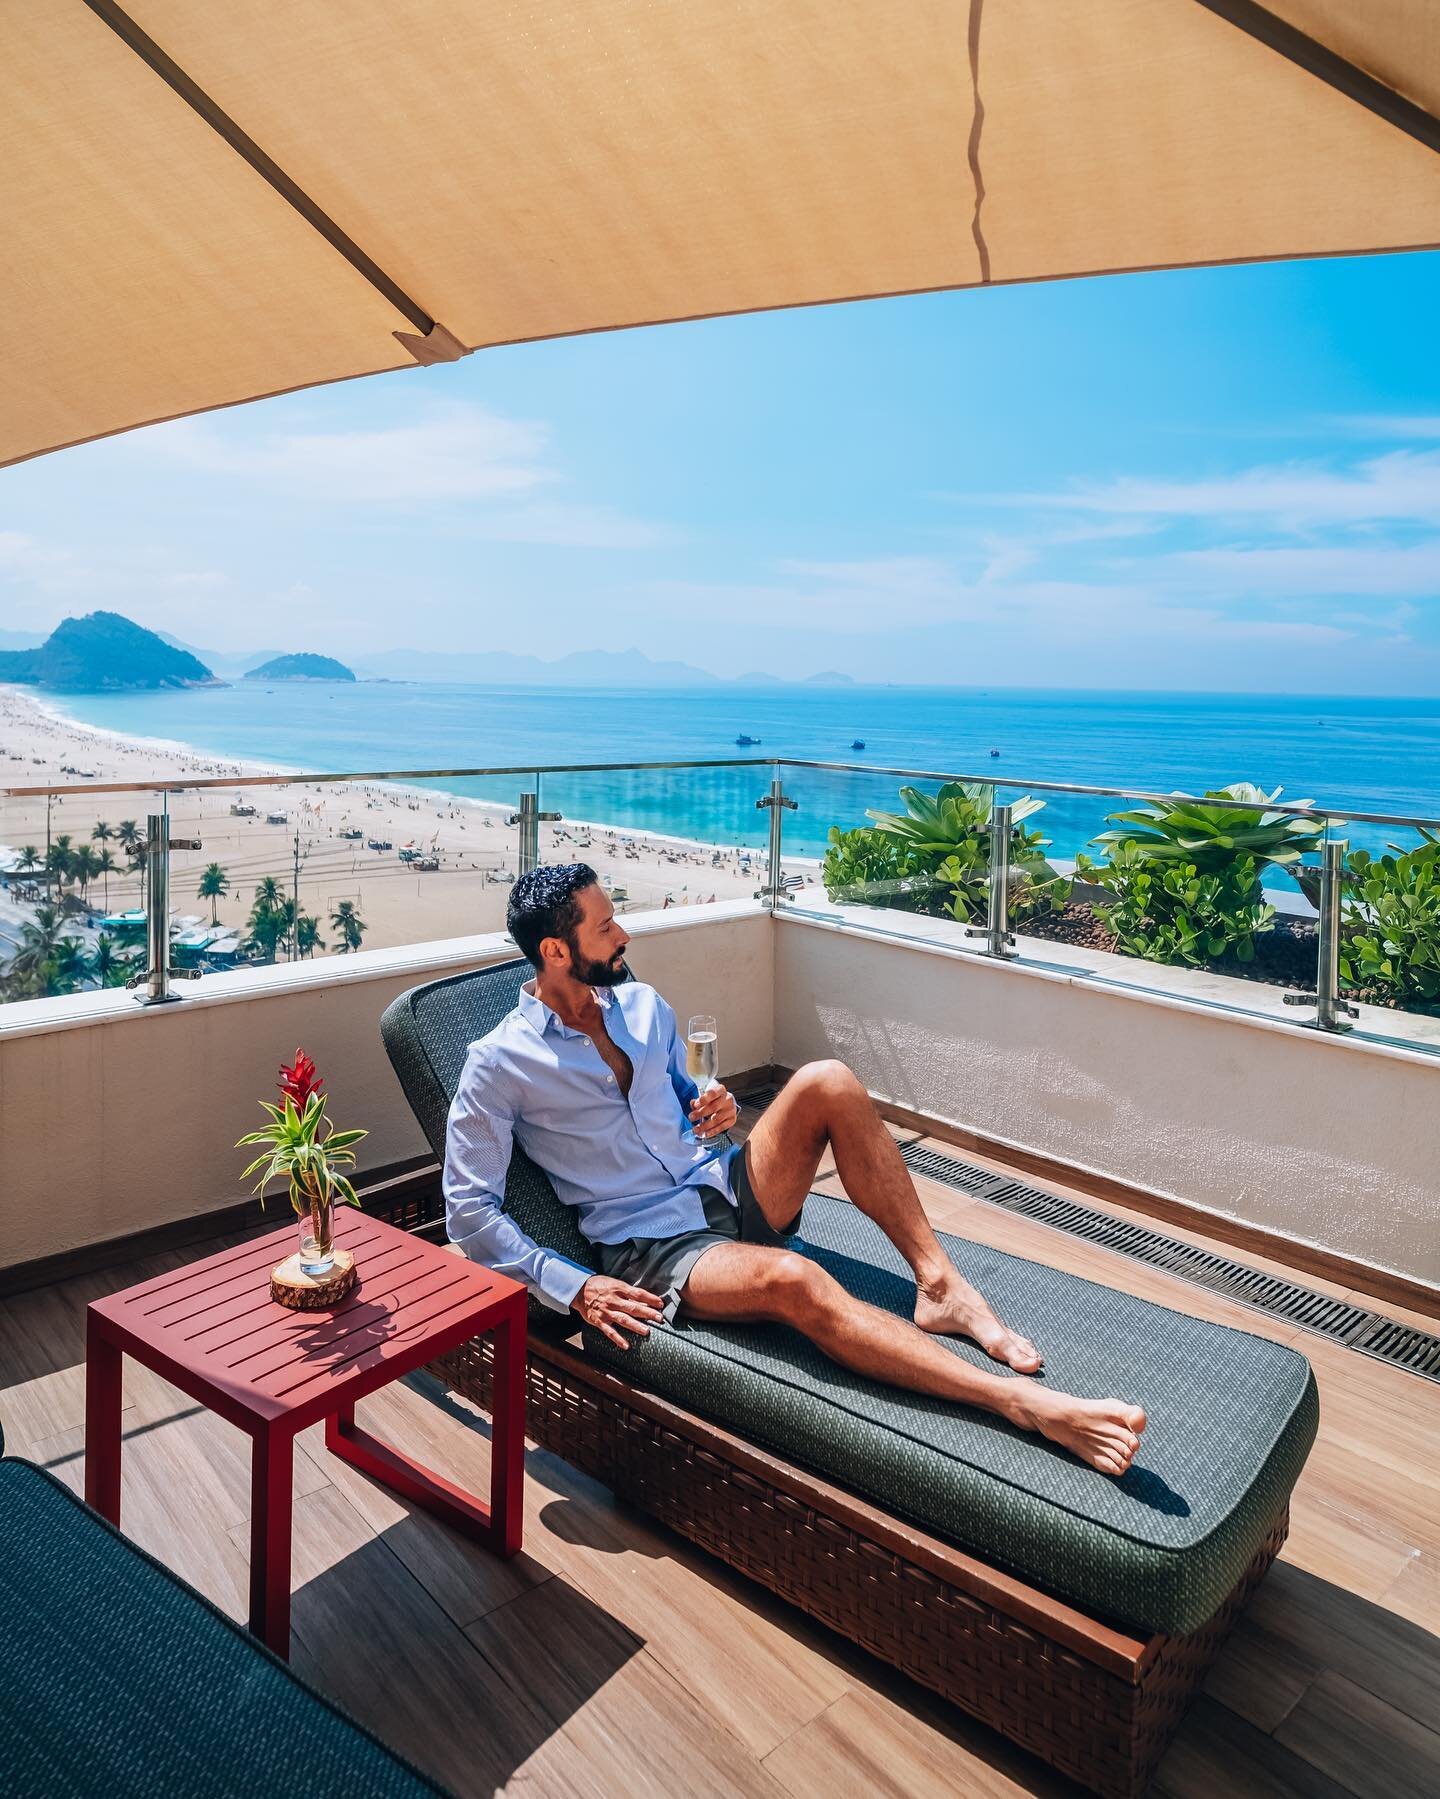 Rio&rsquo;s best kept secret isn&rsquo;t a secret anymore ! 

This is the Oce&acirc;nica Suite at the beautiful @mercureboutiquecopacabana 

It Features a huge private terrace with an outdoor shower facing Copacabana
Beach, one of the most famous bea